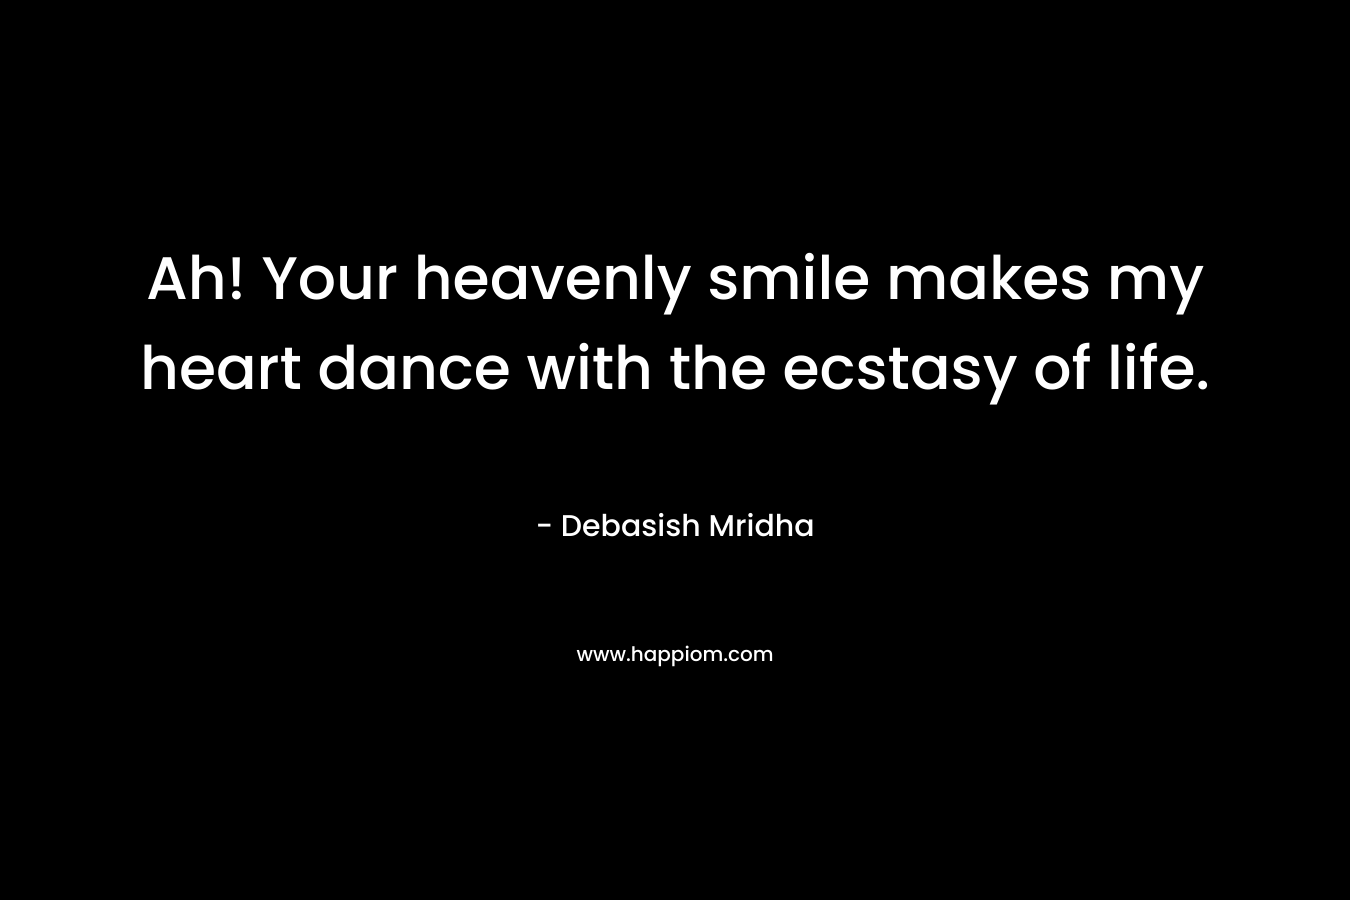 Ah! Your heavenly smile makes my heart dance with the ecstasy of life.